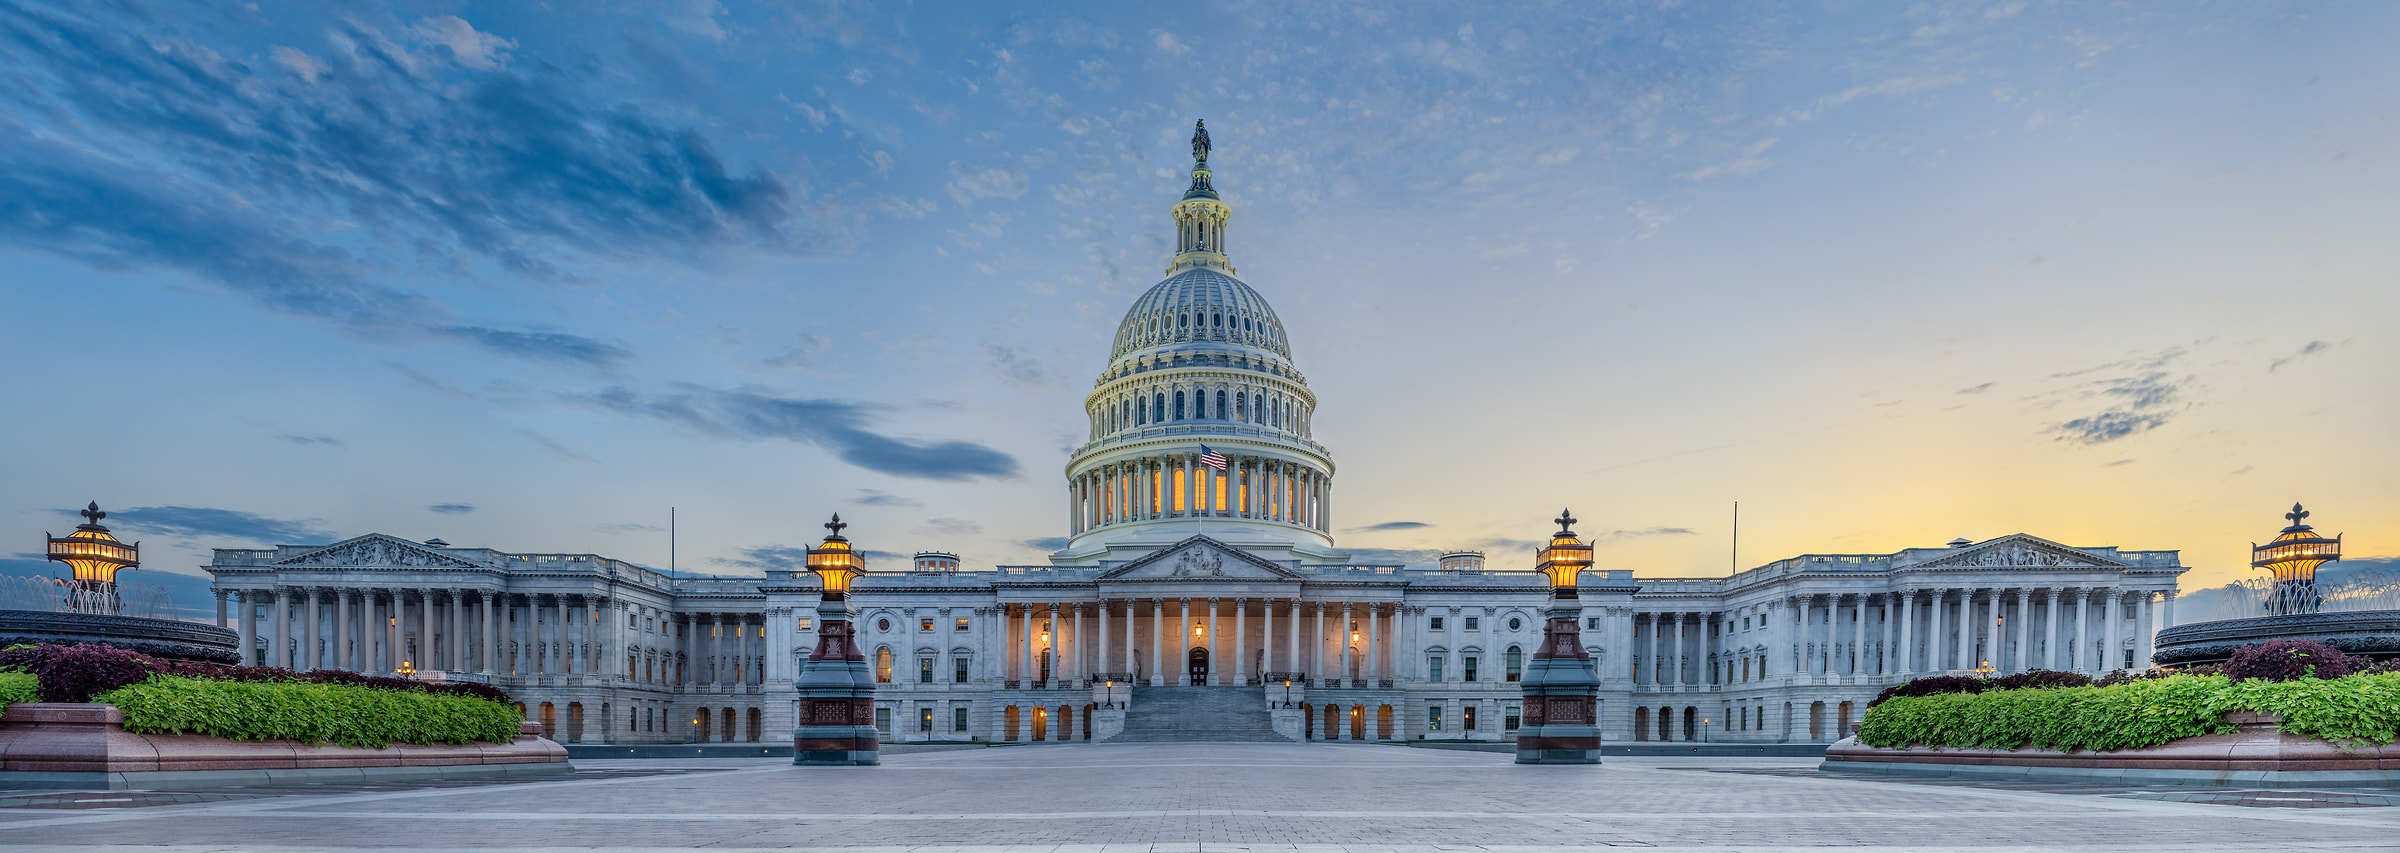 263 megapixels! A very high resolution, large-format VAST photo print of the U.S. Capitol Building at sunset and twilight; photograph created by Tim Lo Monaco in the United States Capitol, Washington, D.C., USA